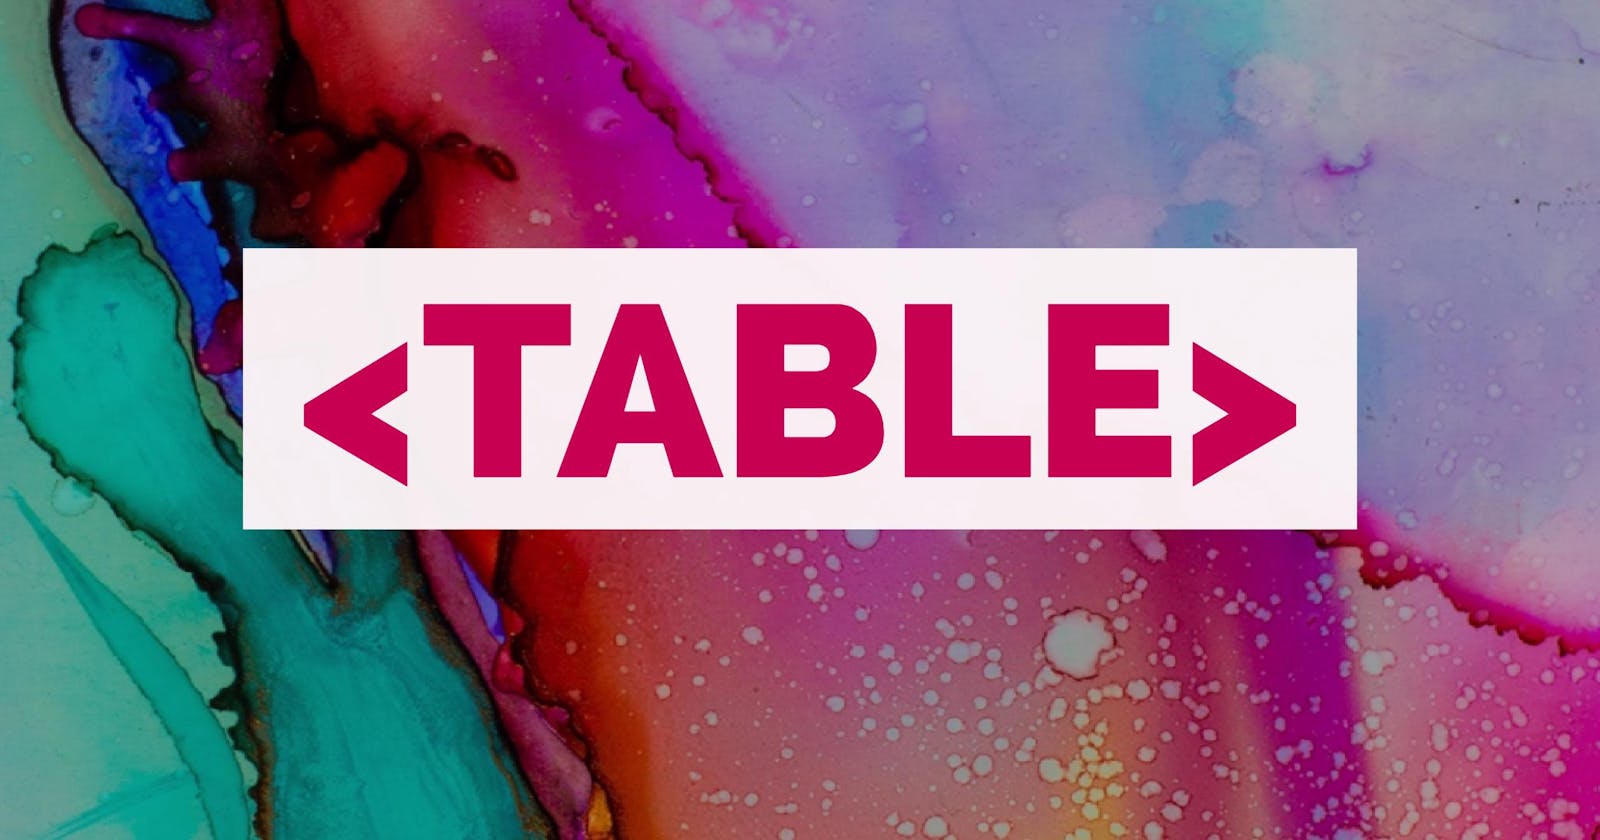 The <table>